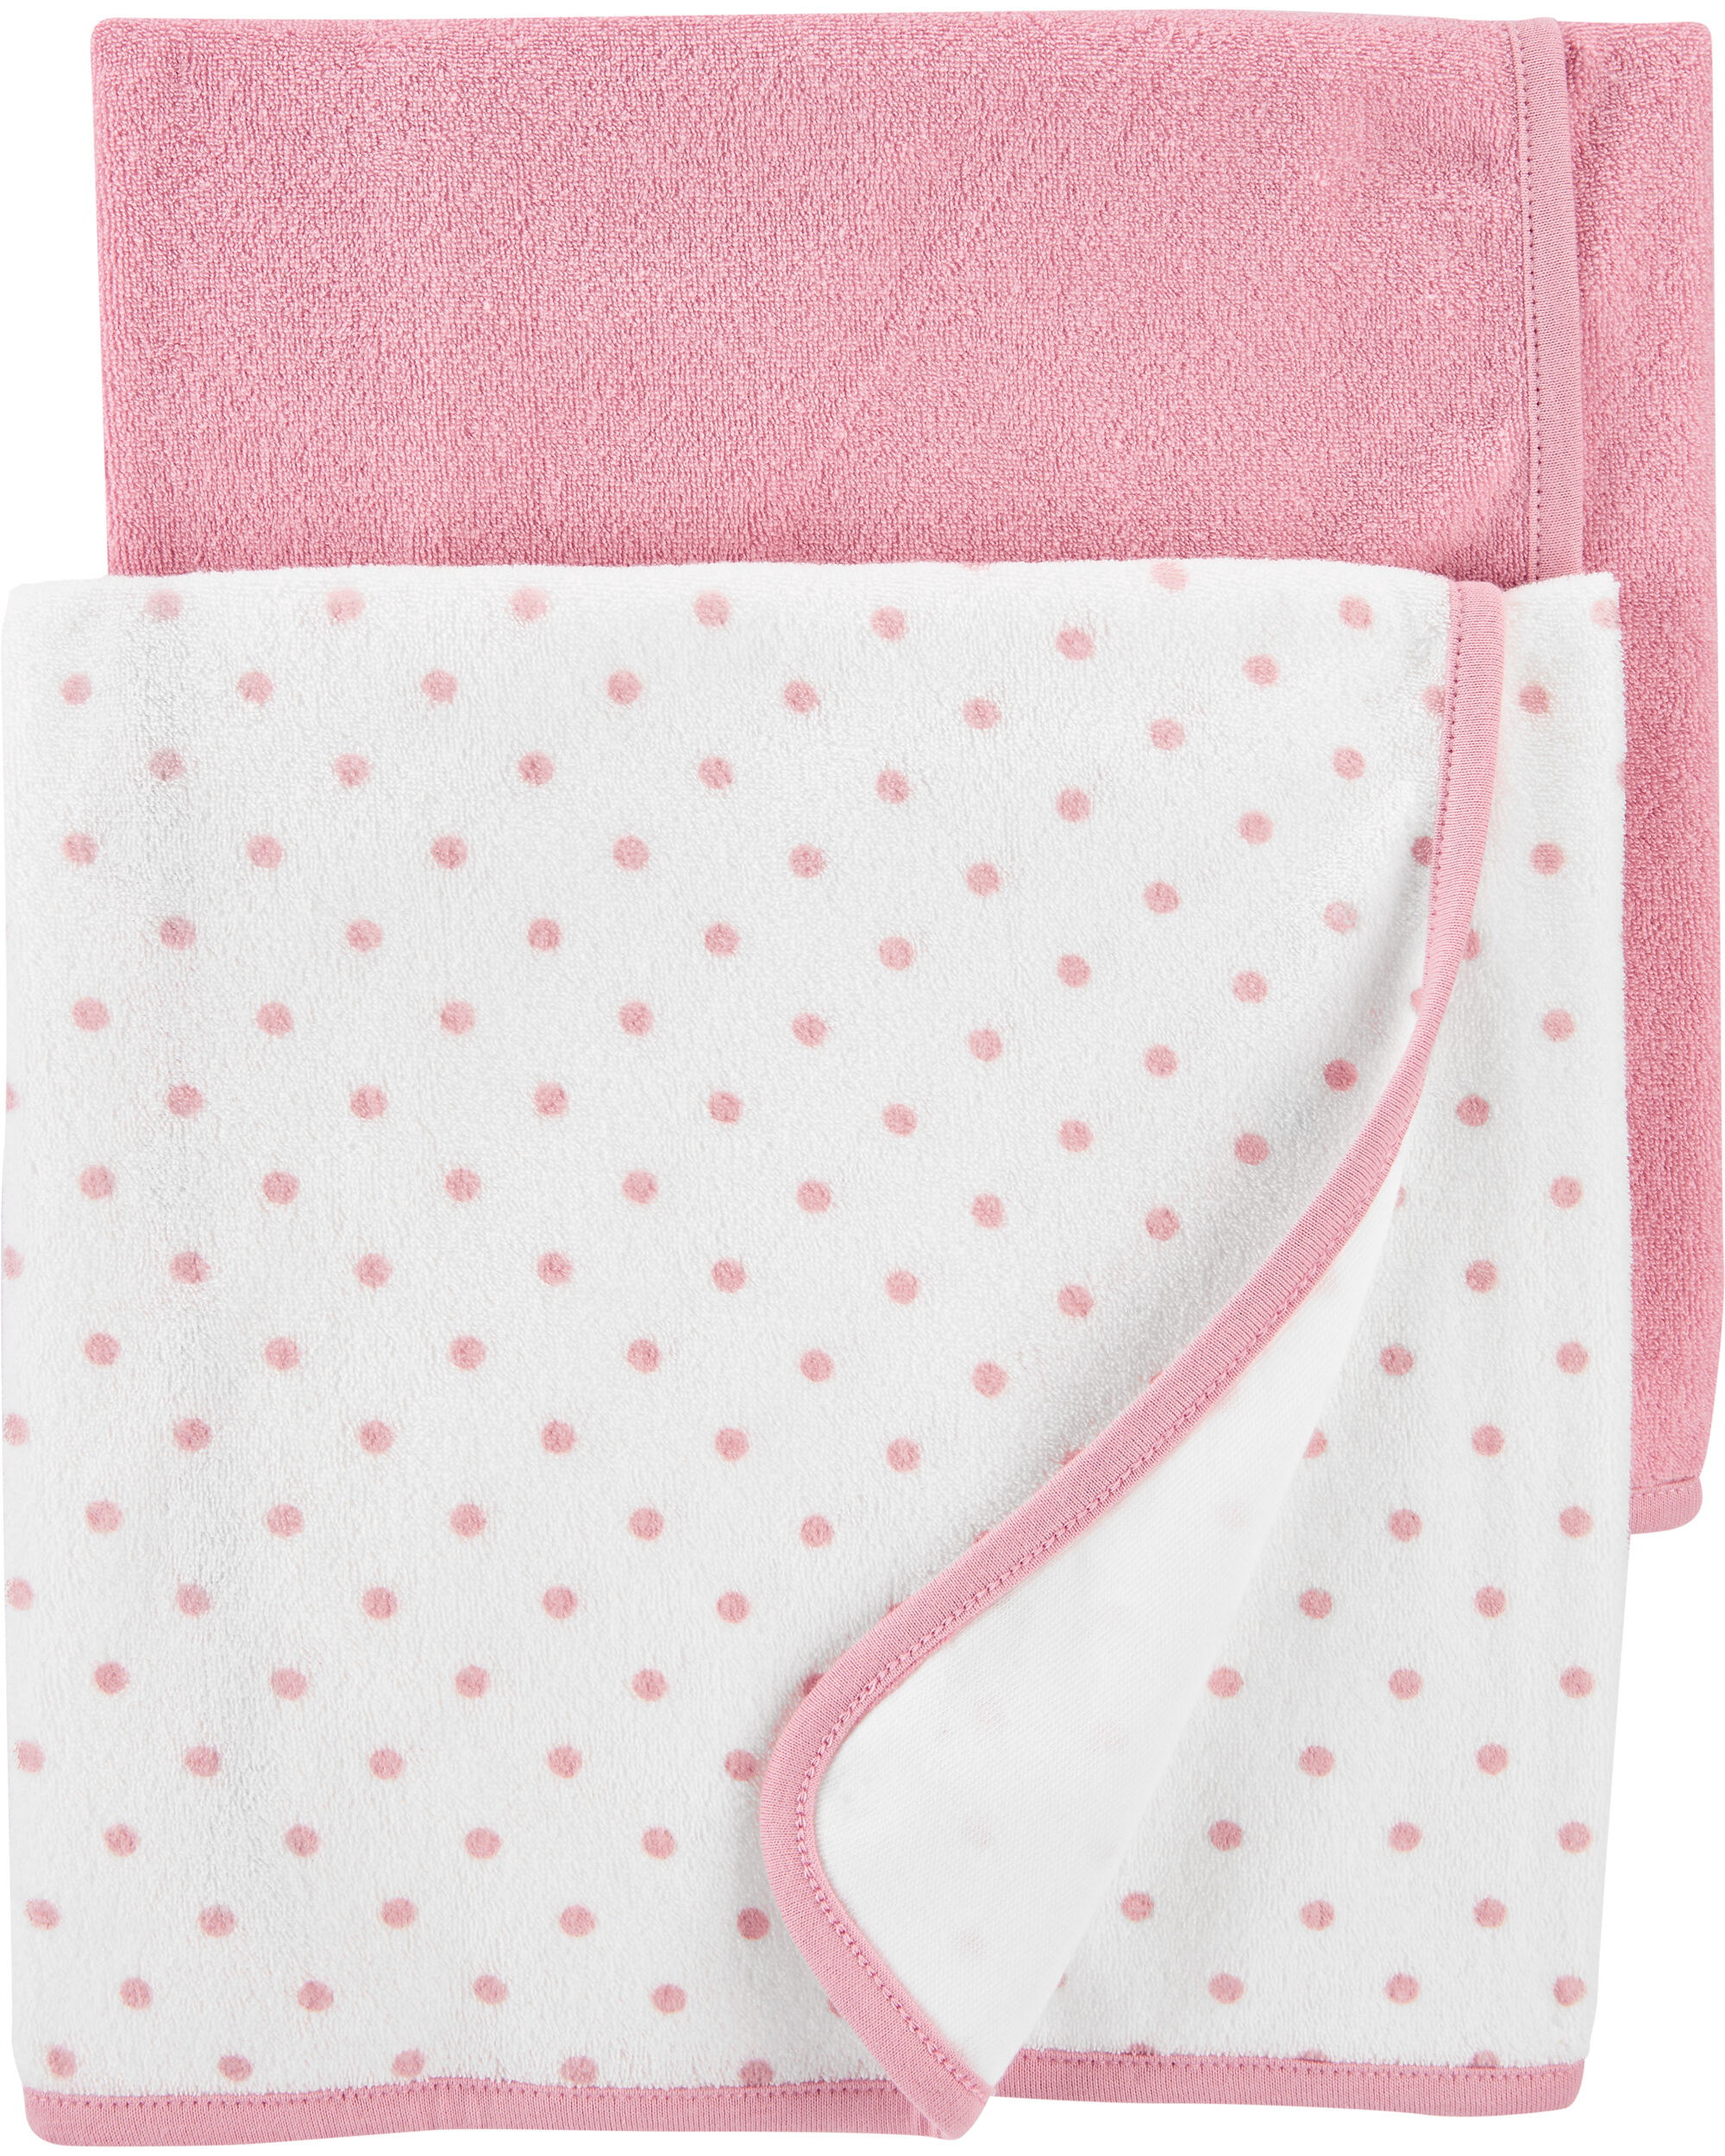  *CLEARANCE* 2-Pack Baby Towels 